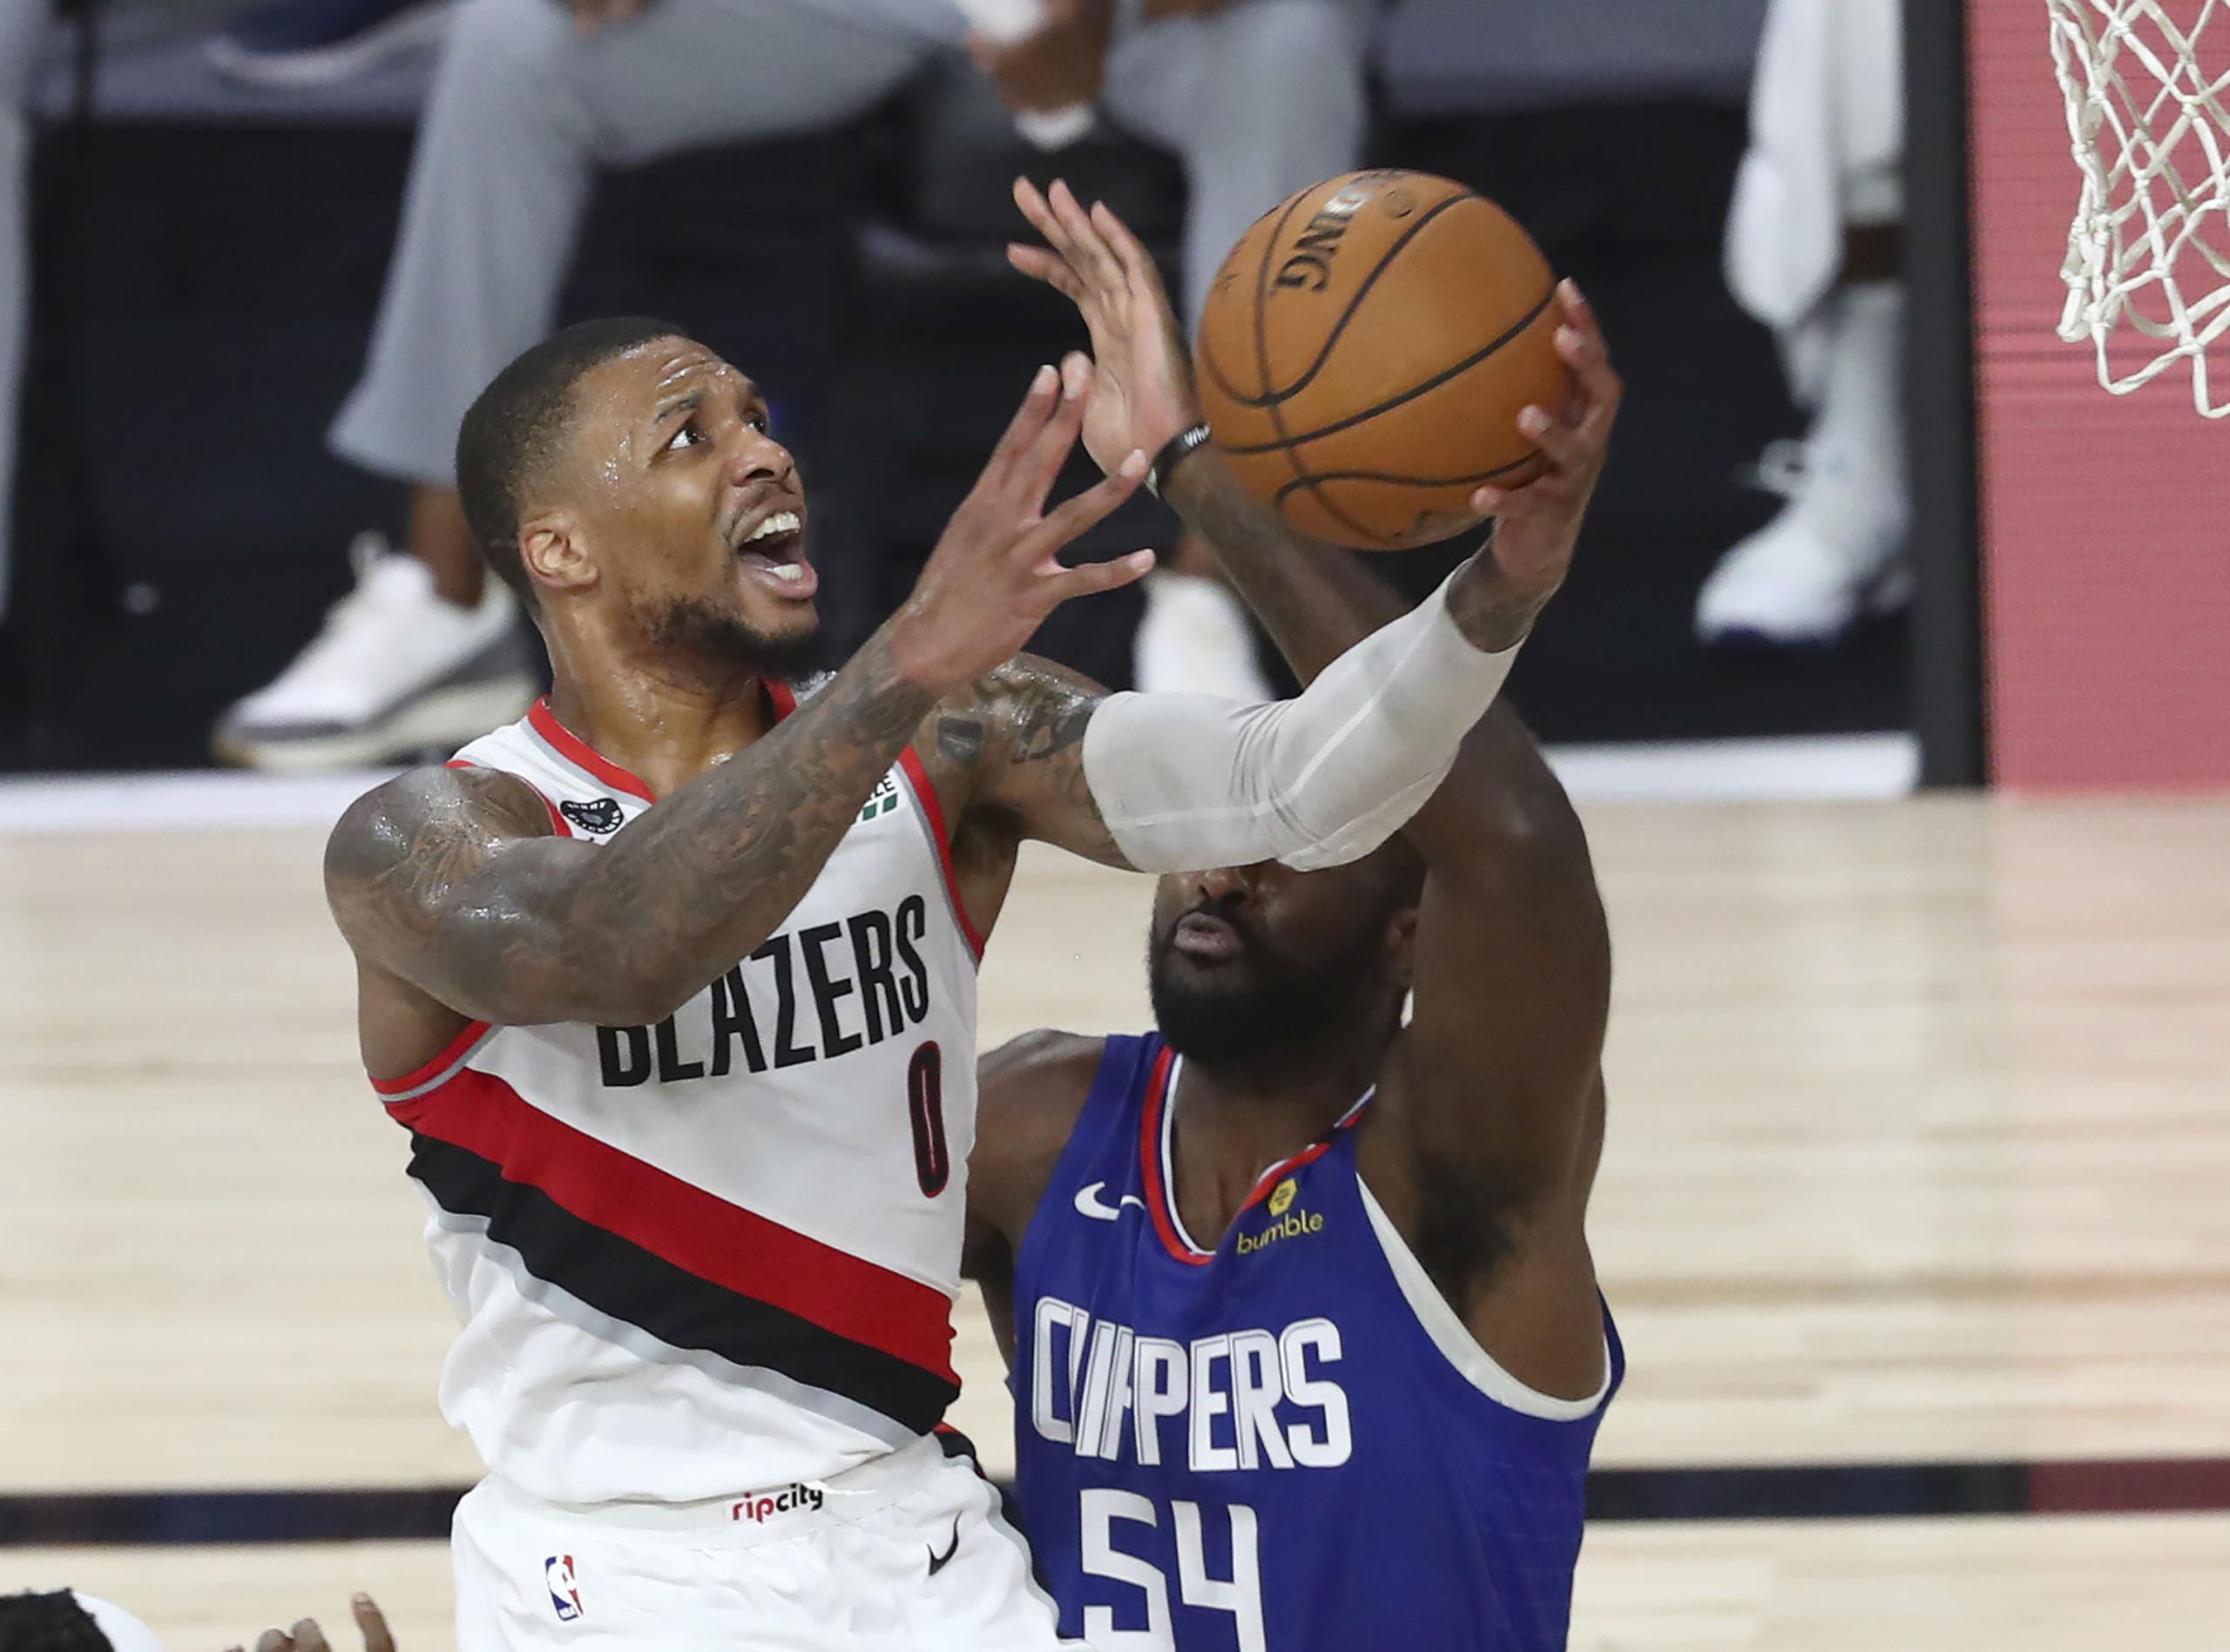 Portland Trail Blazers guard Damian Lillard (0) shoots past Los Angeles Clippers' Patrick Patterson (54) during the second half in an NBA basketball game Saturday, Aug. 8, 2020, in Lake Buena Vista, Fla.